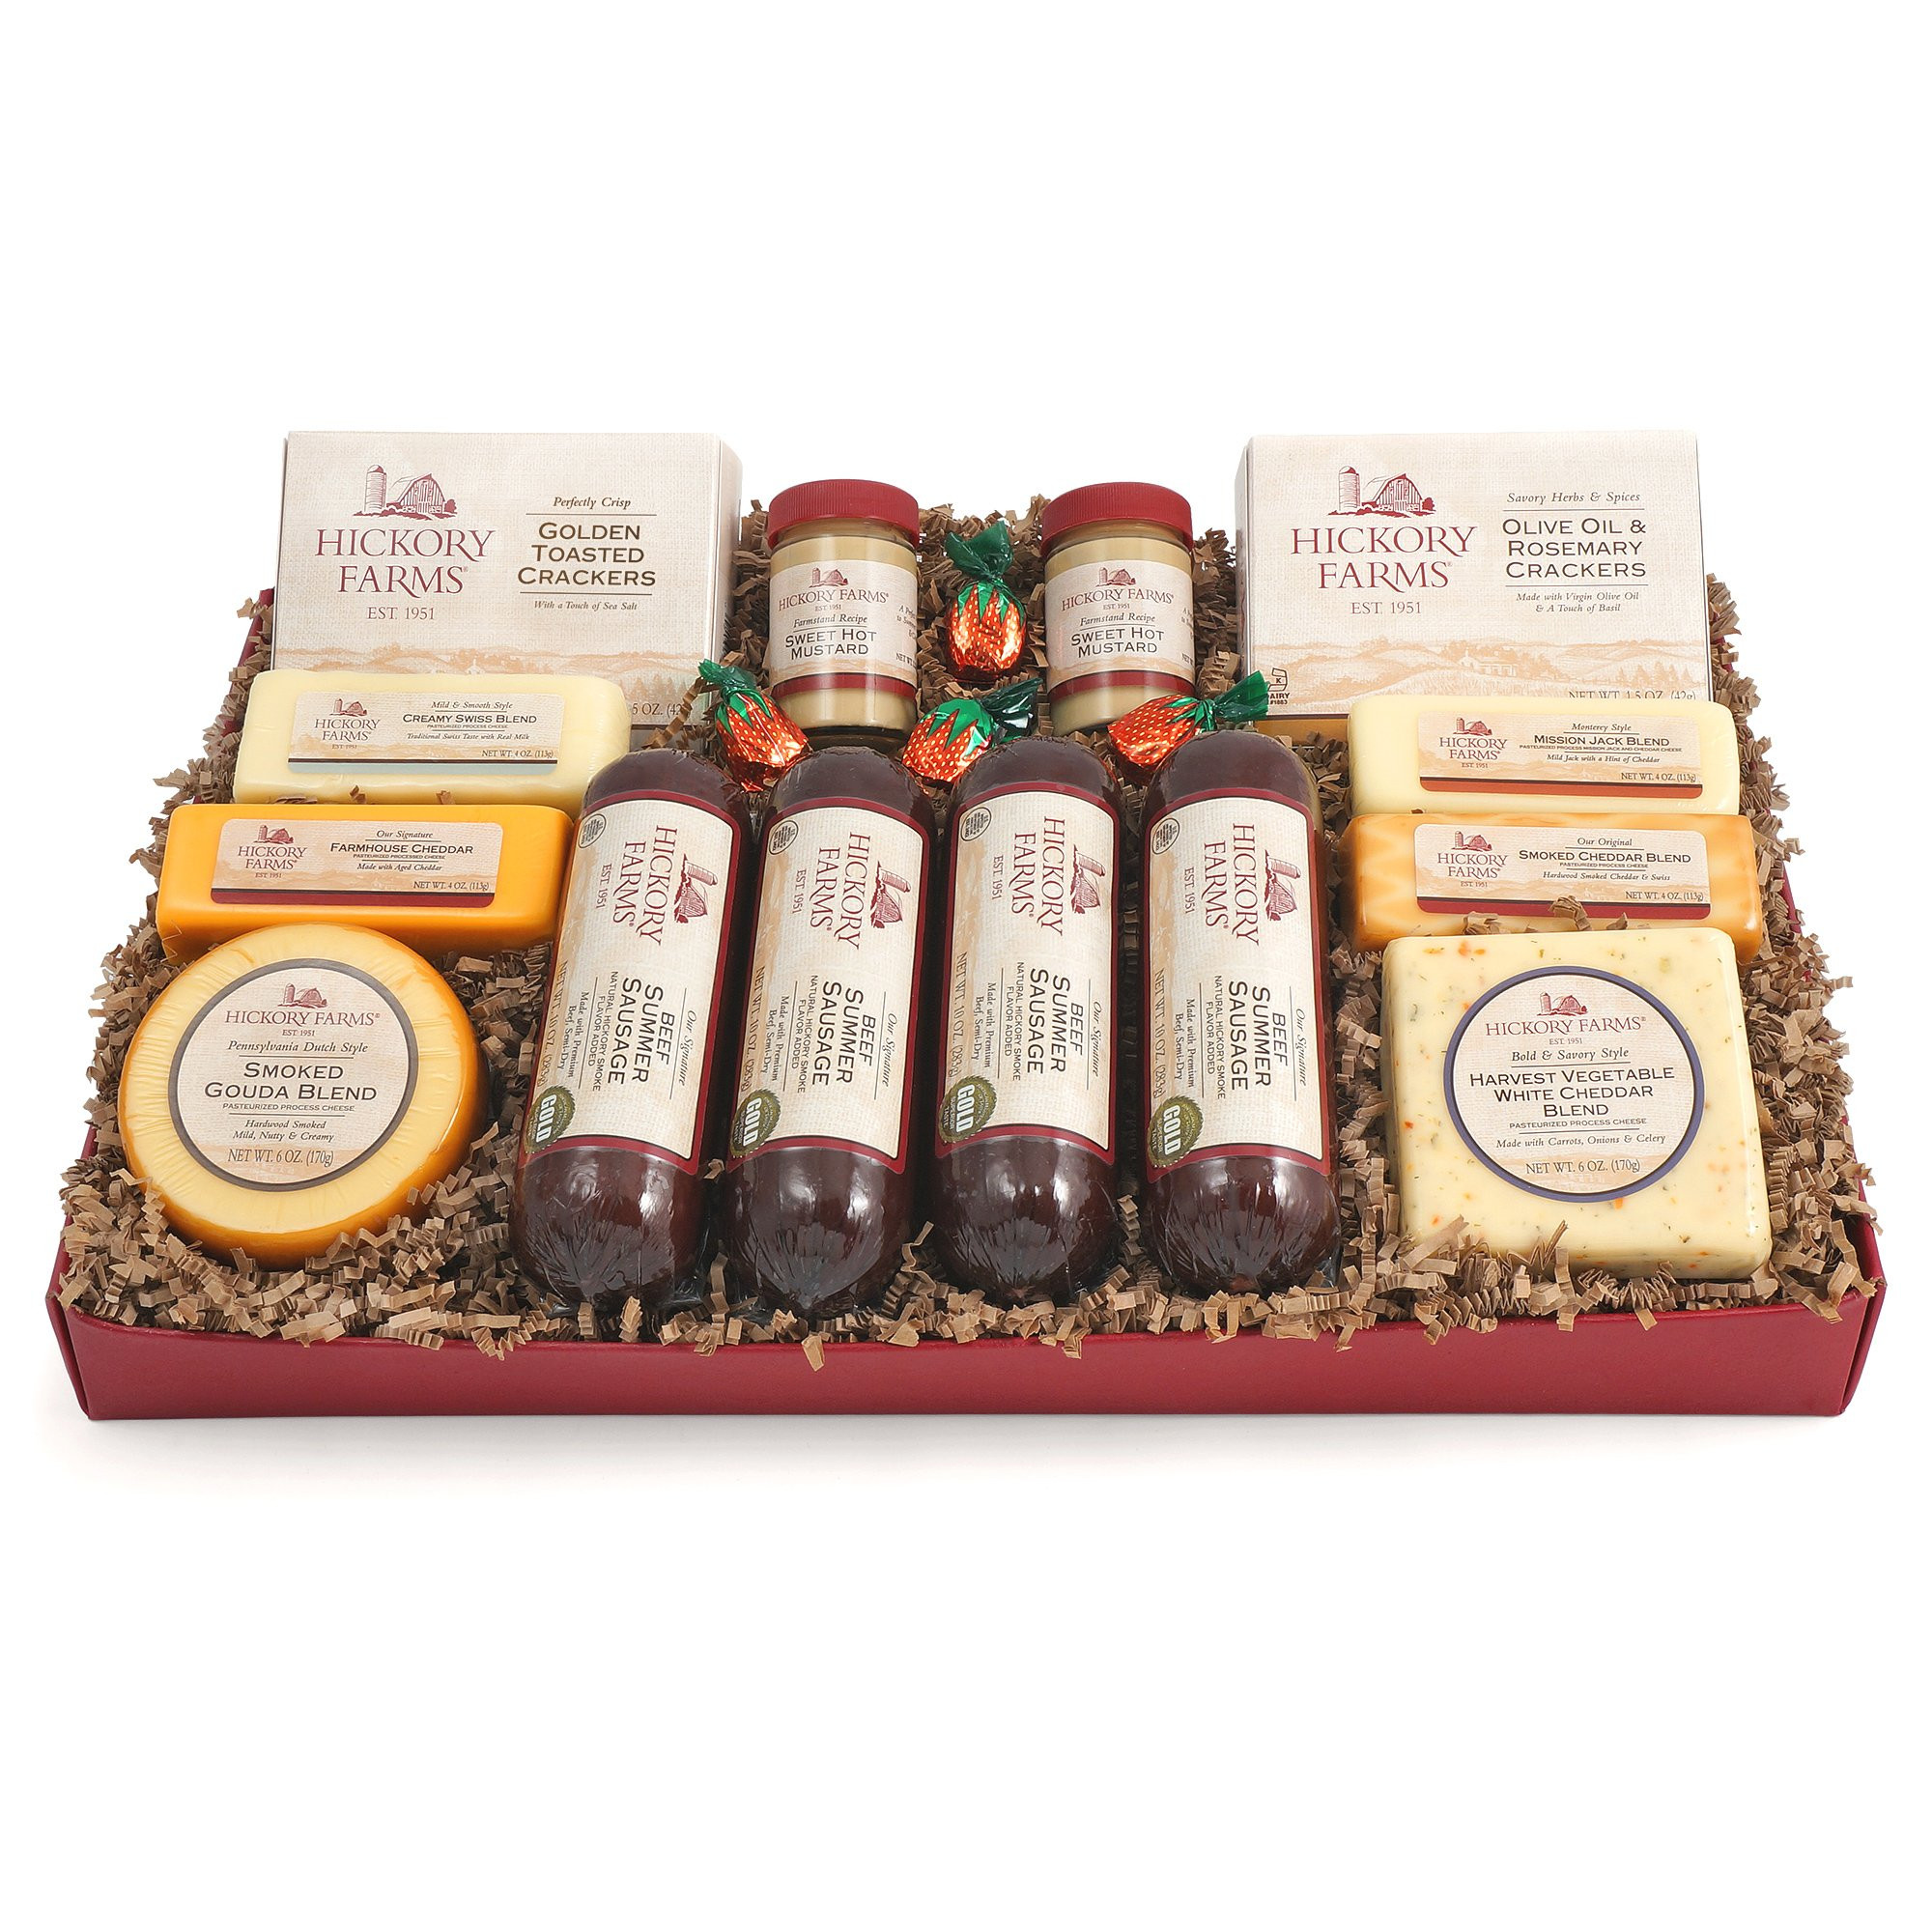 Summer Sausage And Cheese Gift Baskets
 Amazon Hickory Farms Summer Sausage and Cheese Gift